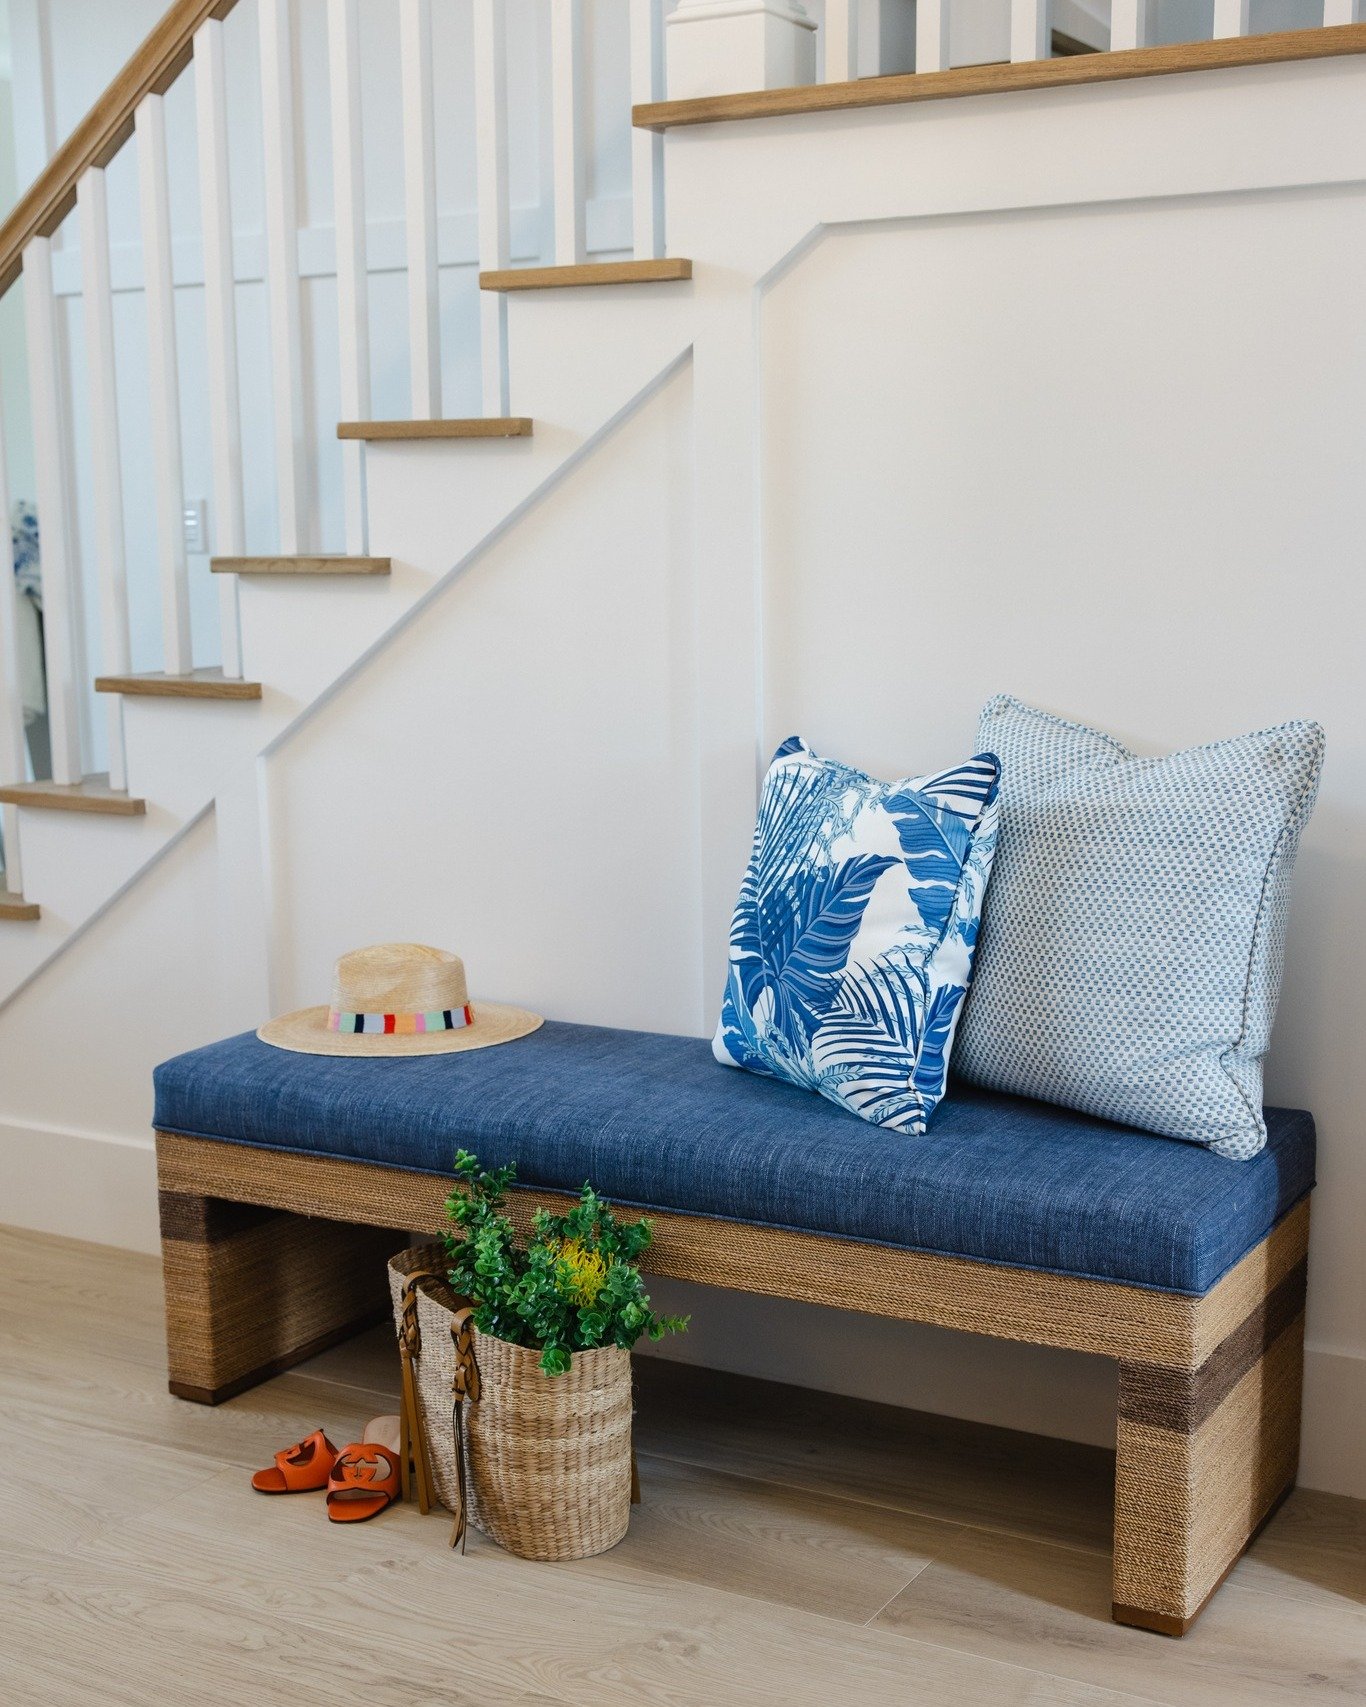 Welcome inside! 🌊 This newly designed entryway is brimming with coastal charm and practicality, making every entrance memorable. Remember, your entryway sets the tone for your home&mdash;it's a space you simply can't ignore. 

#HomeDesign #EntrywayI